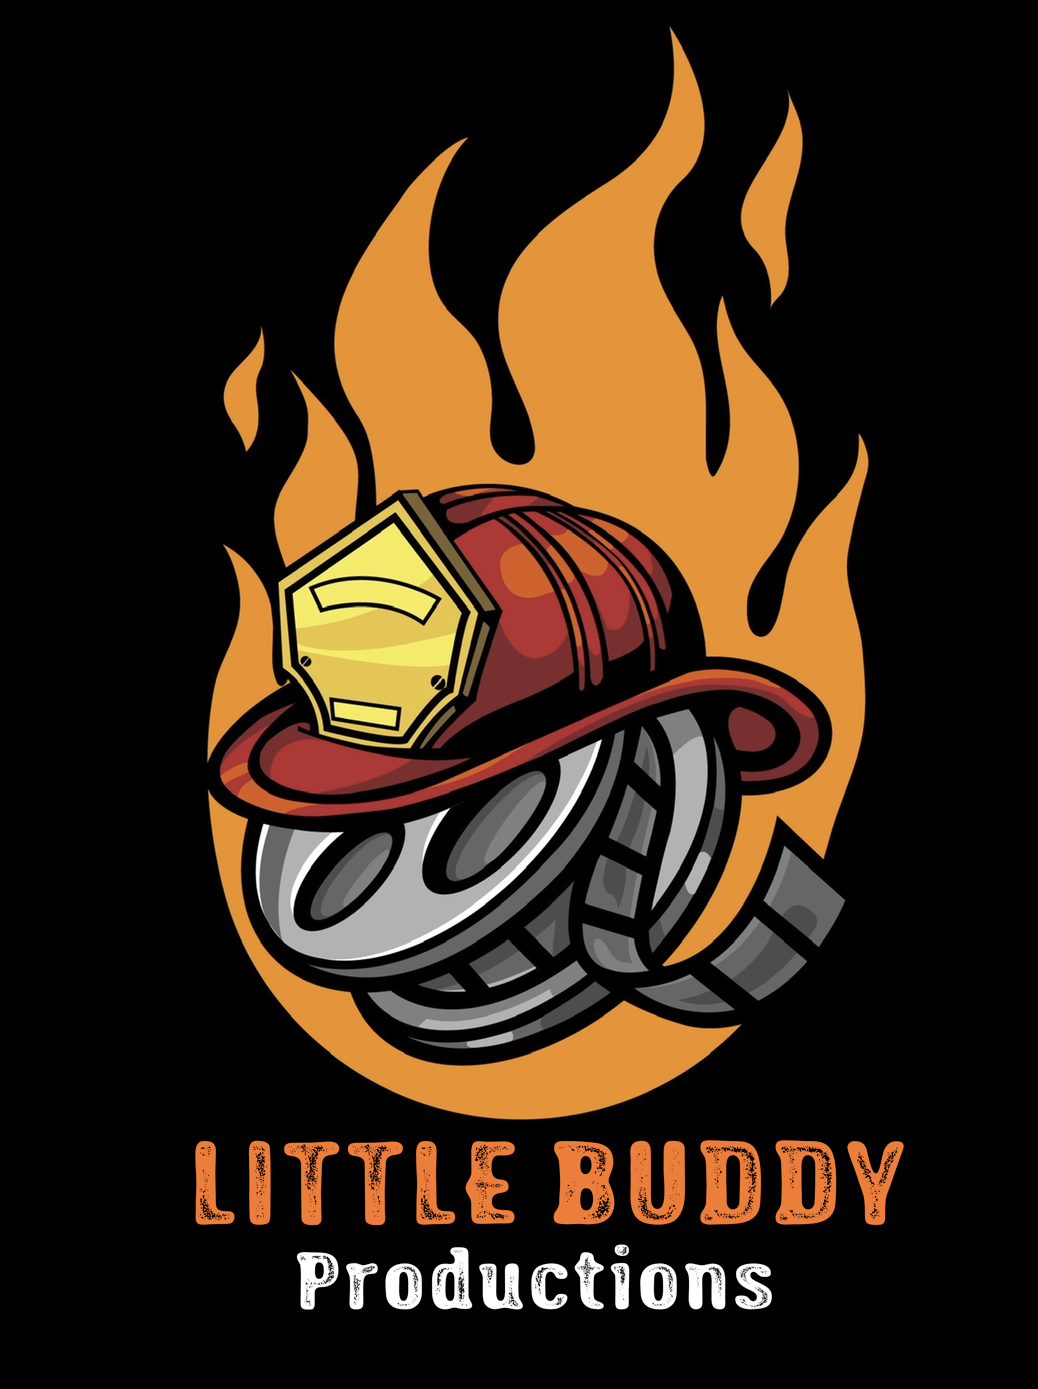 Little Buddy Productions